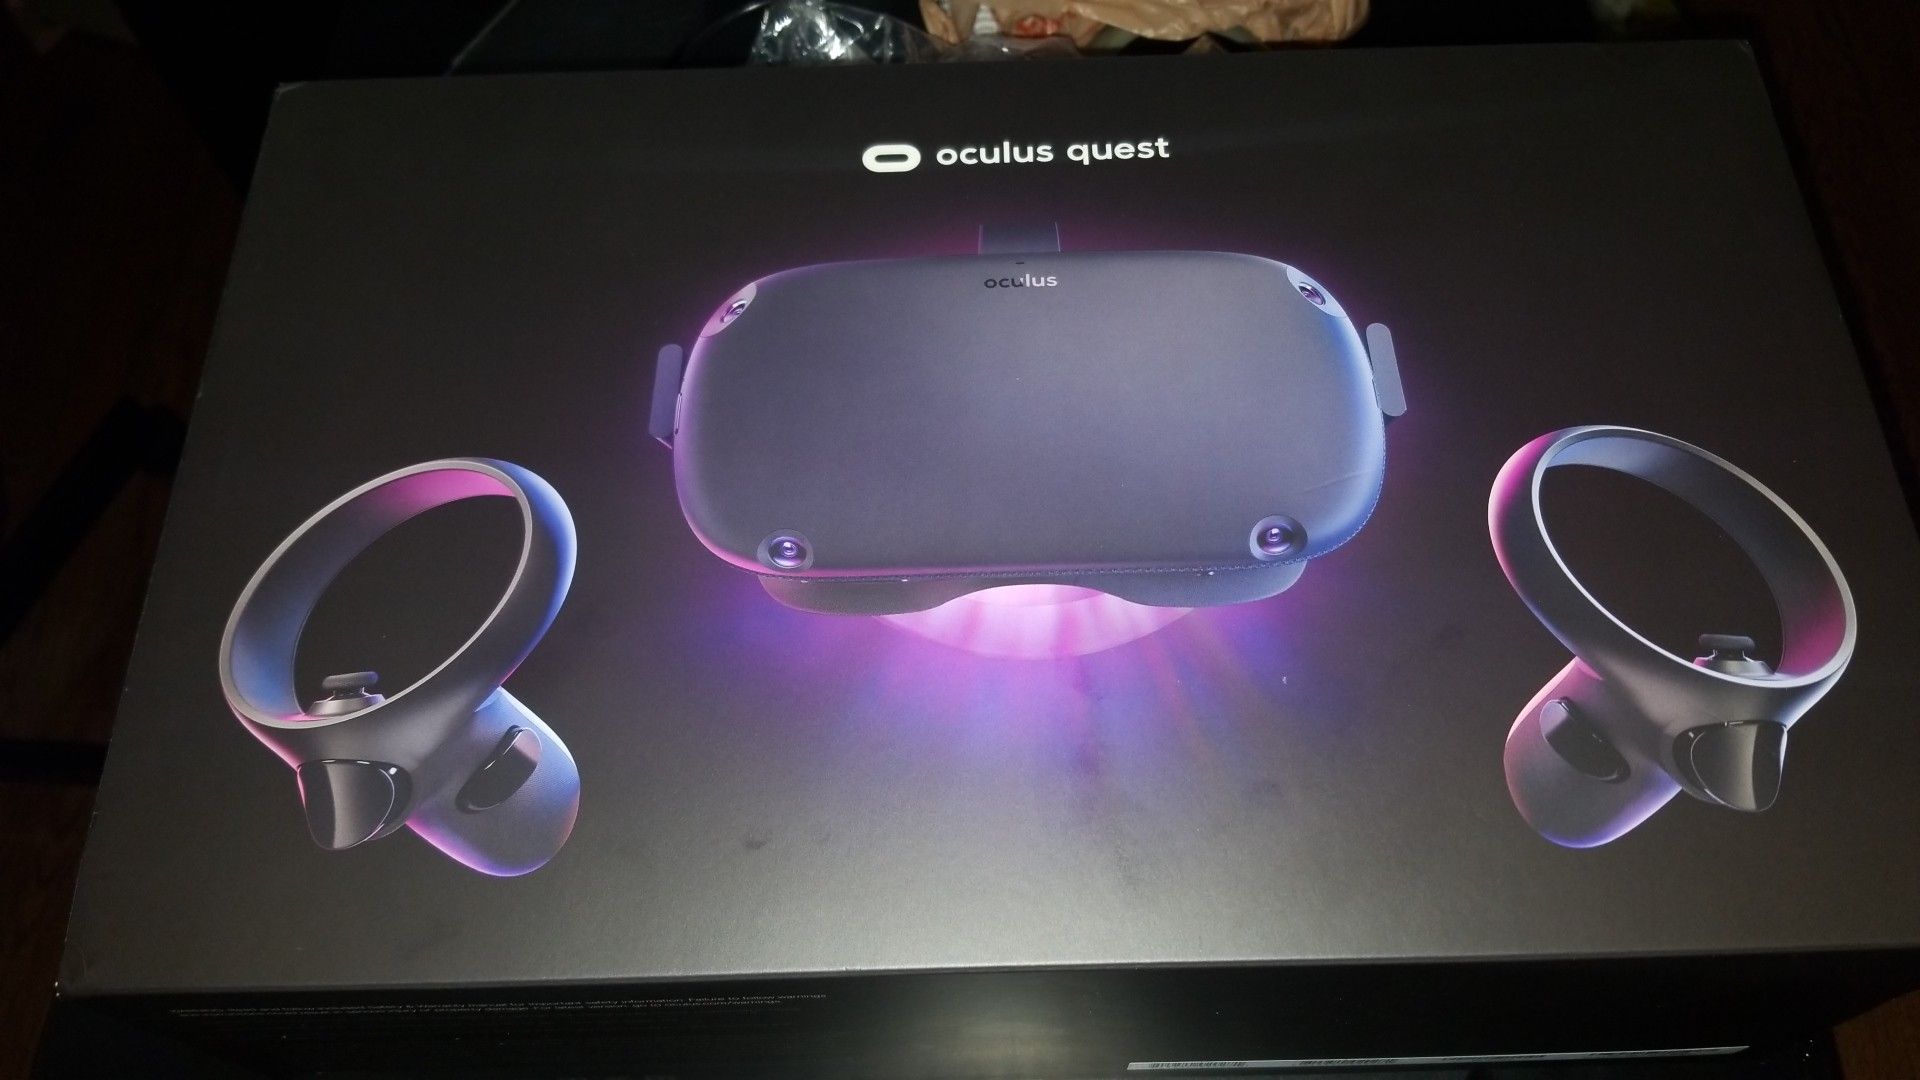 Almost new Oculus Quest in box